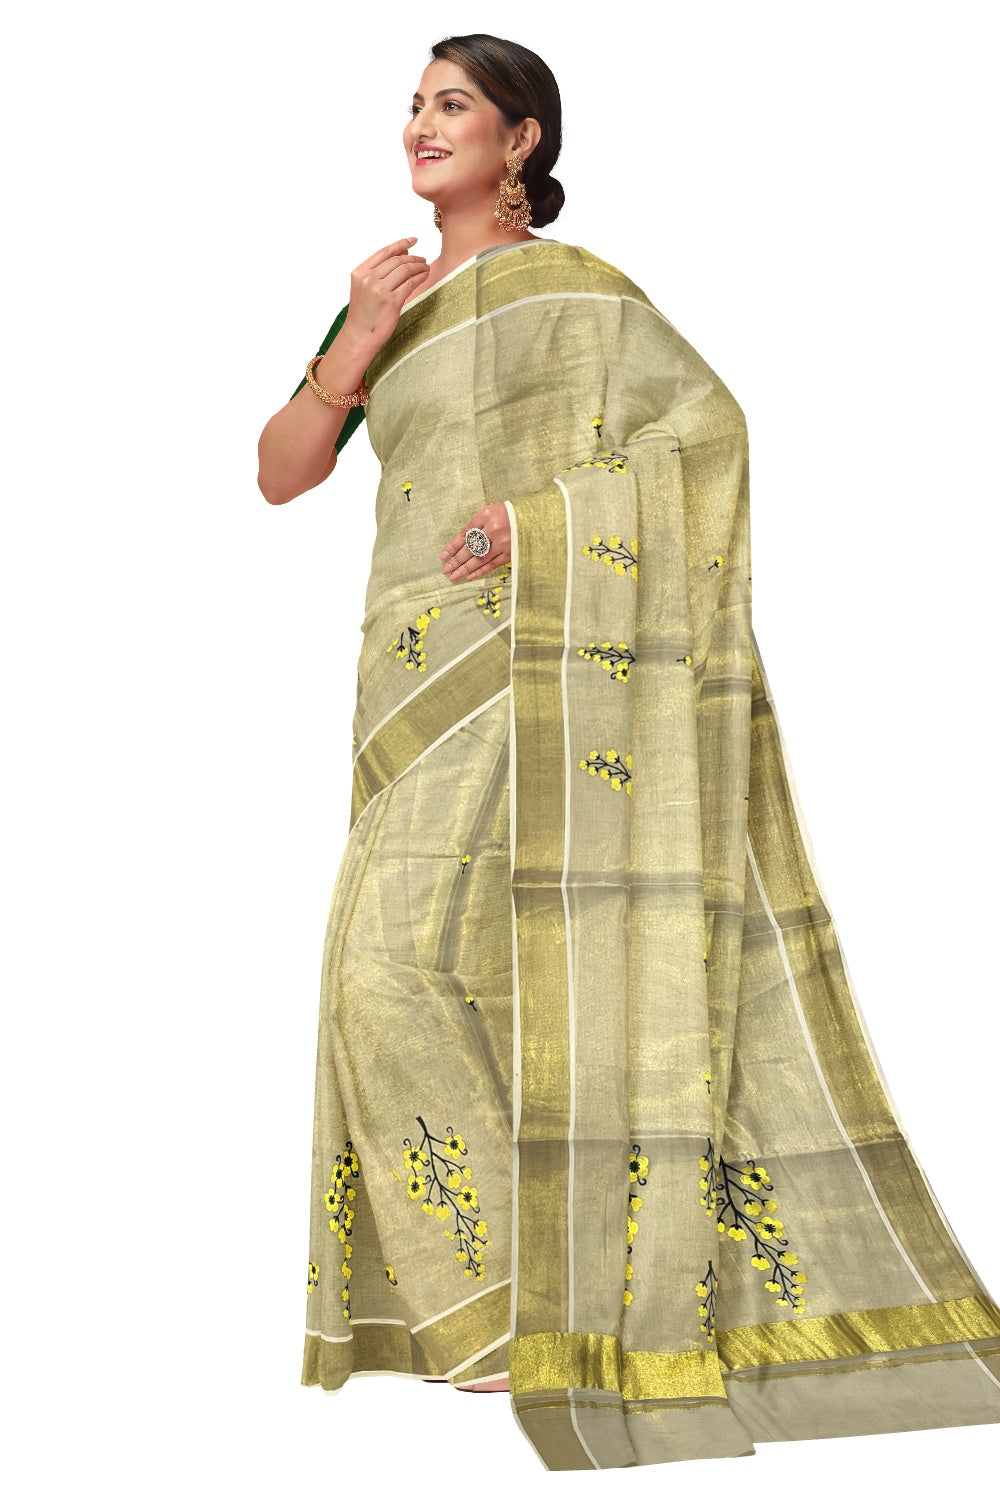 Southloom Special Tissue Kasavu Saree with Floral Embroidery Design